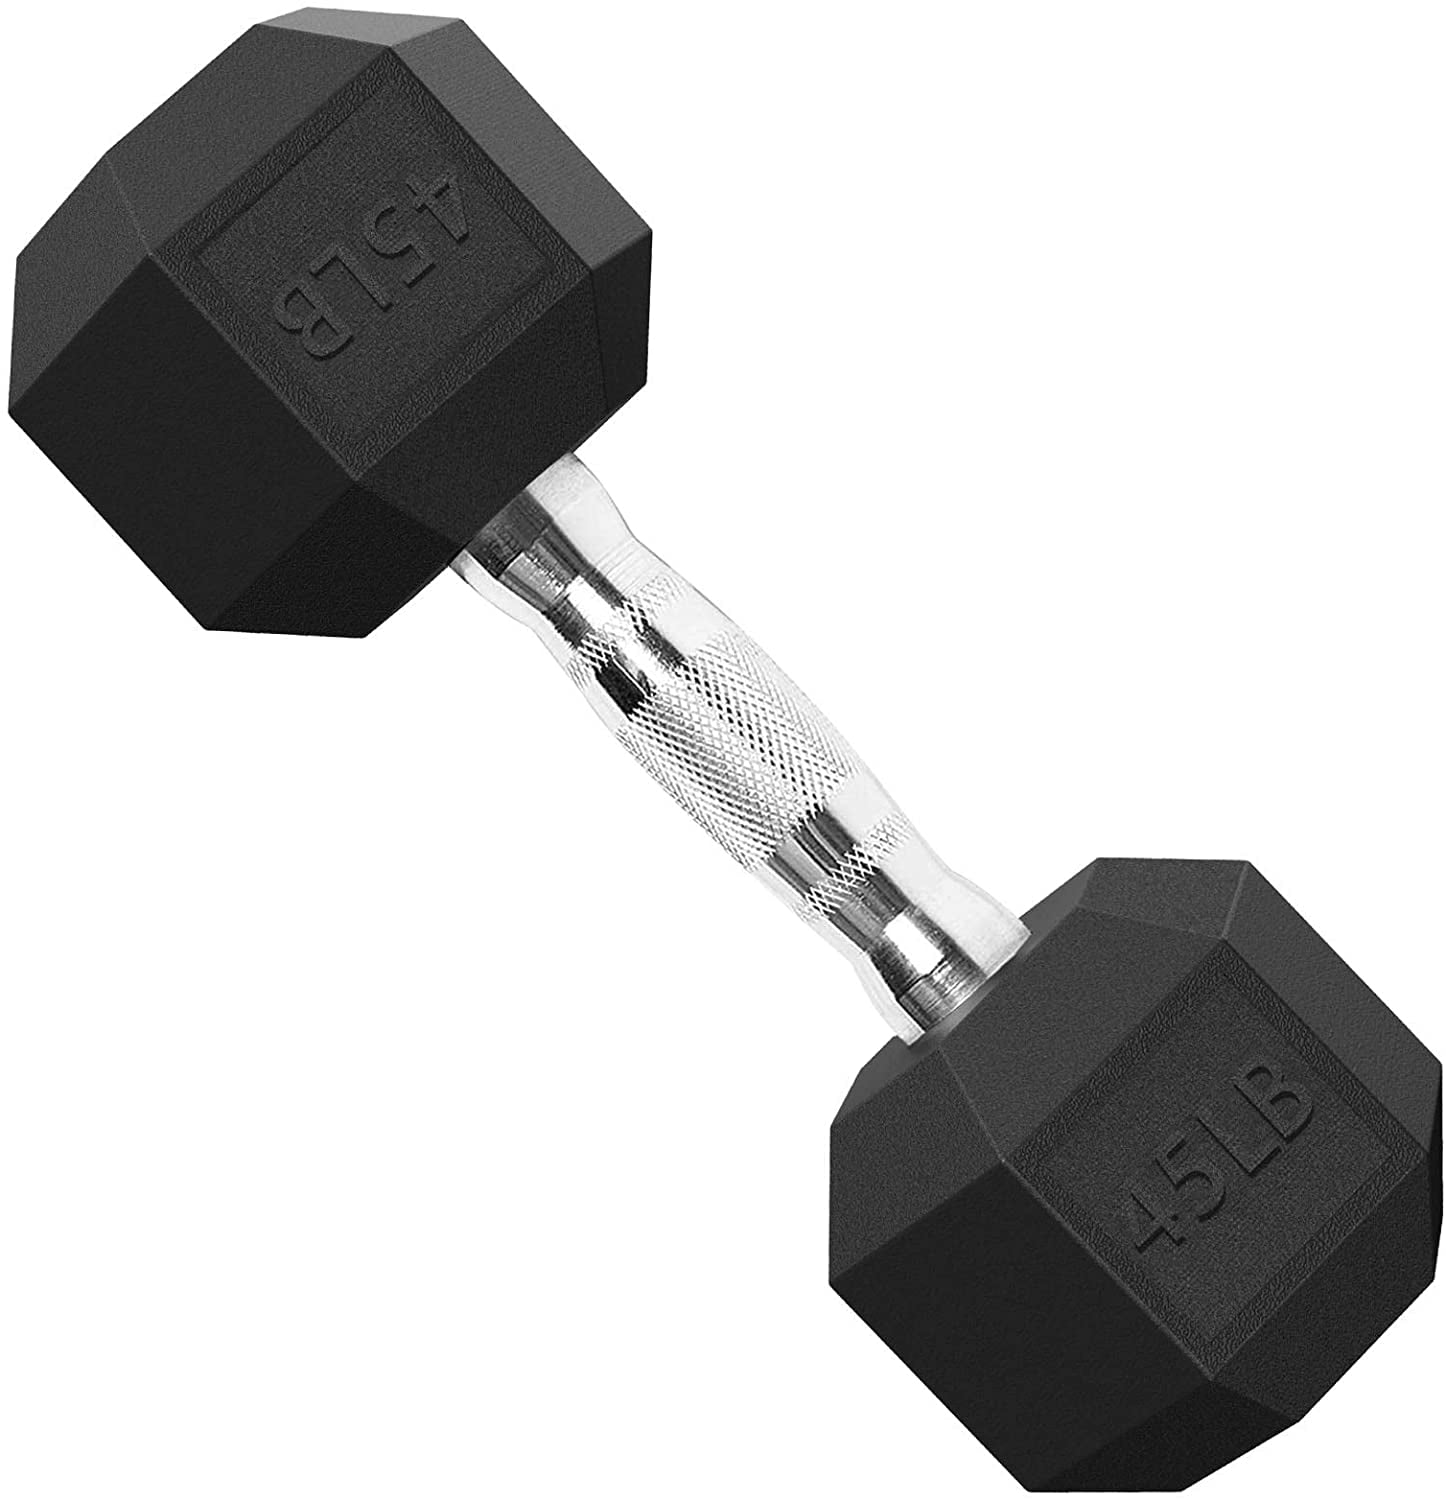 Cast Iron Hex Dumbbells 22-55lbs Rubber Coated Hand Weight Set Strength Training 